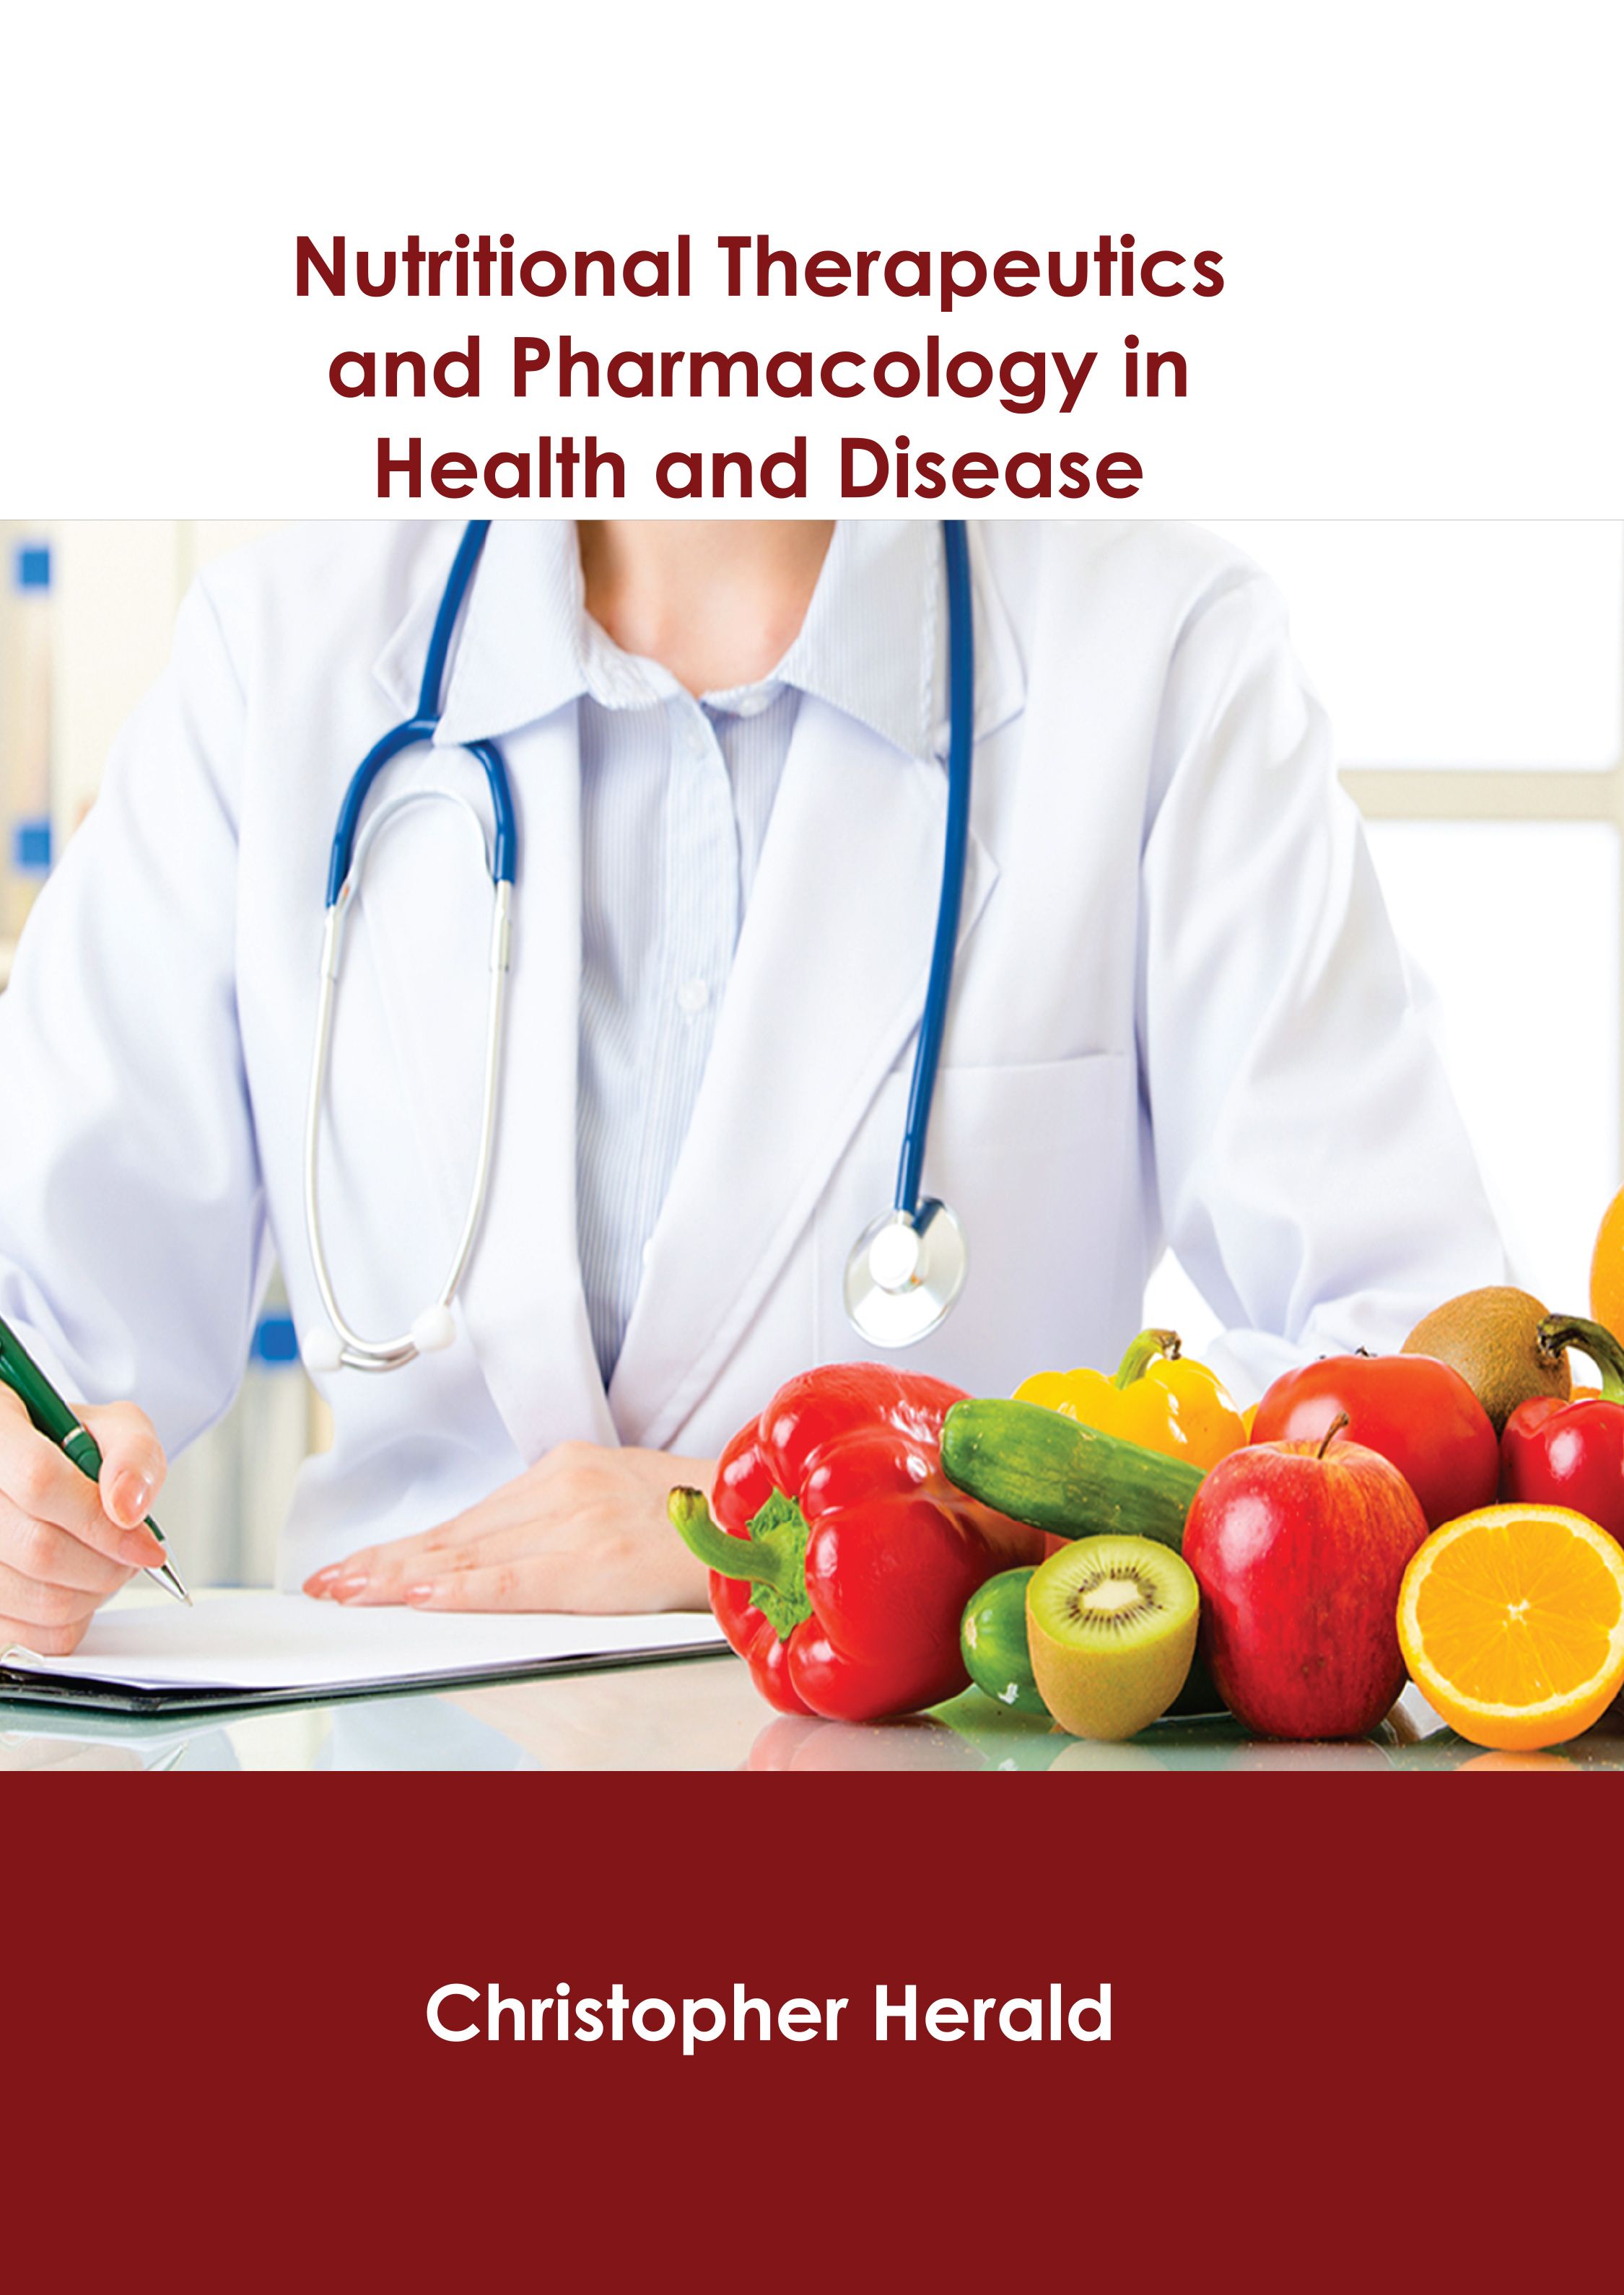 NUTRITIONAL THERAPEUTICS AND PHARMACOLOGY IN HEALTH AND DISEASE